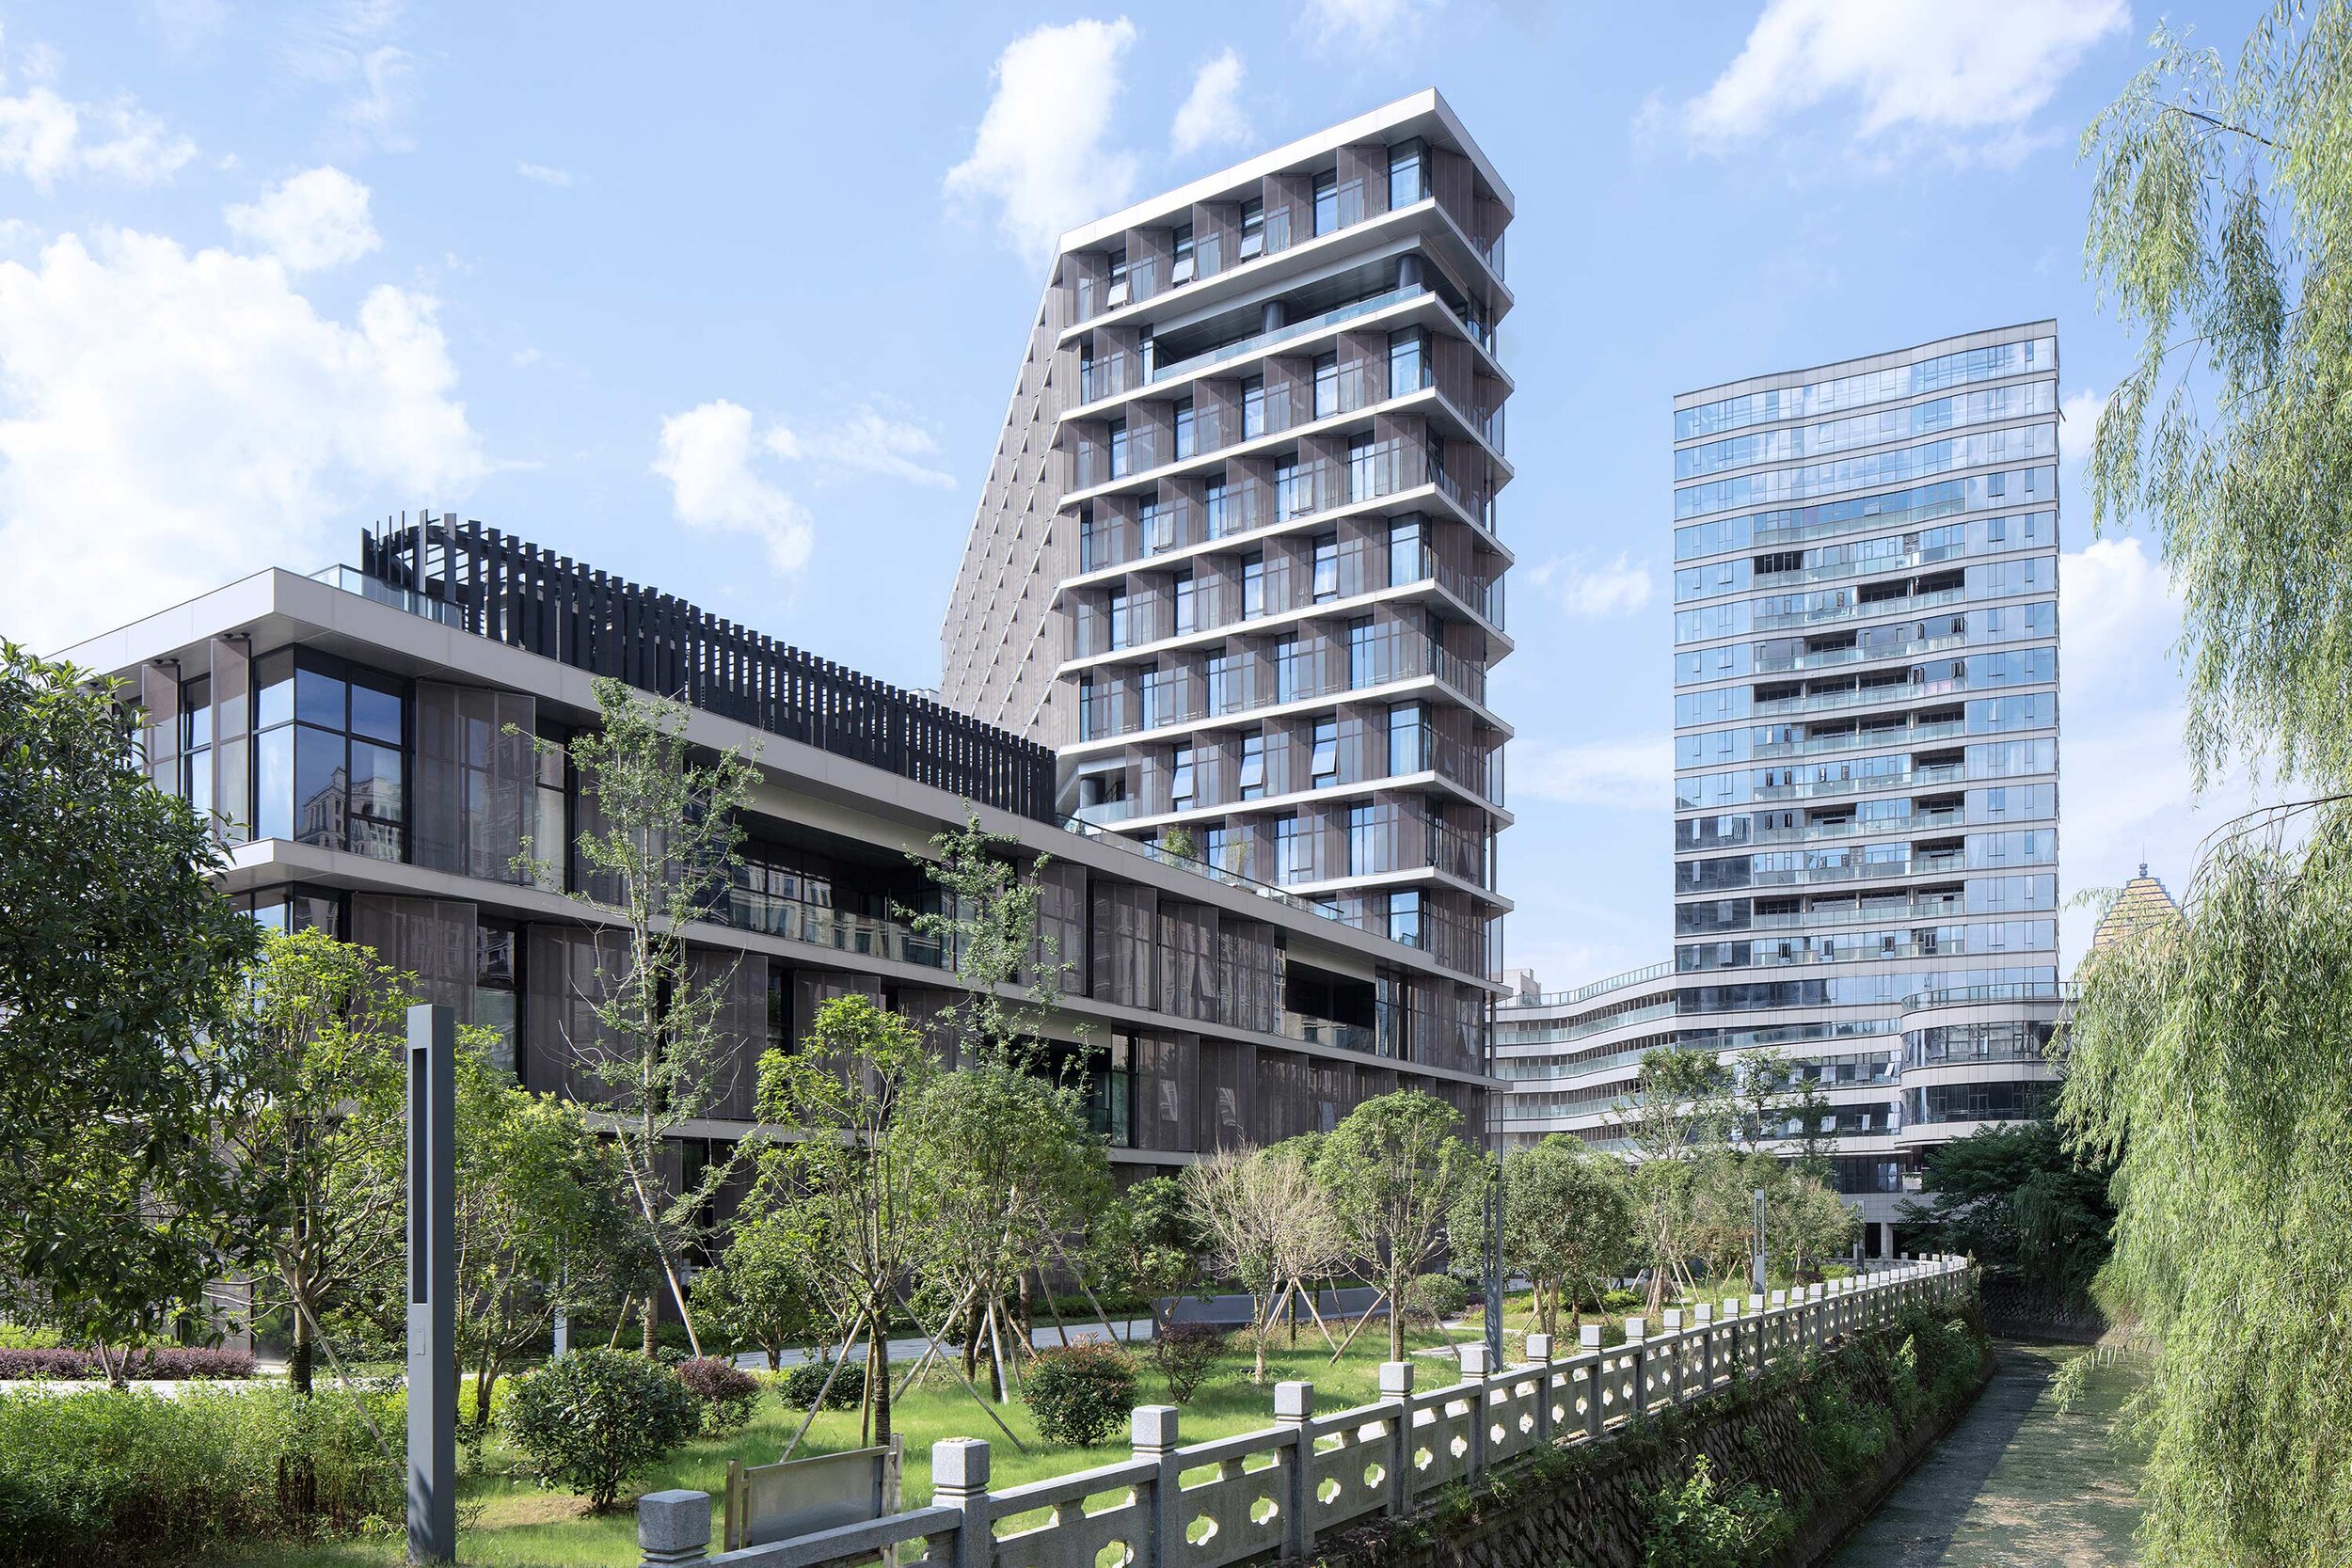 Hangzhou-Tonglu-Archives-Building-BAU-16-The-courtyard-directly-links-the-public-footpath-to-a-proposed-future-pedestrian-bridge-to-the-north.jpg